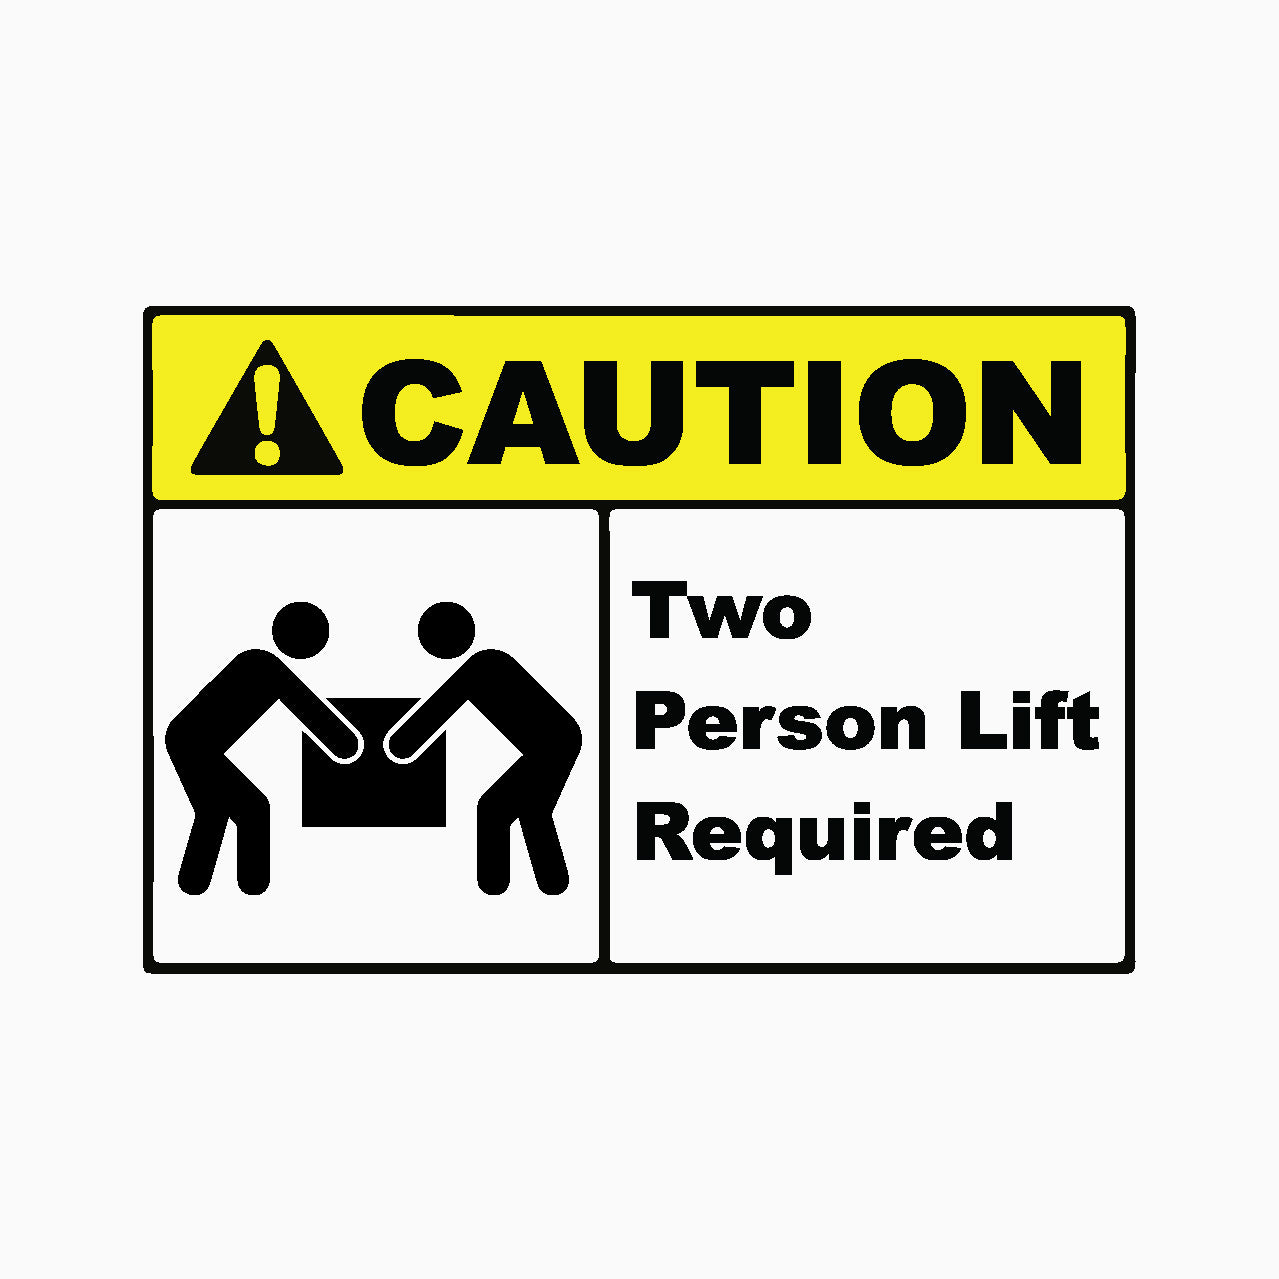 TWO PERSON LIFT REQUIRED SIGN - CAUTION SIGN